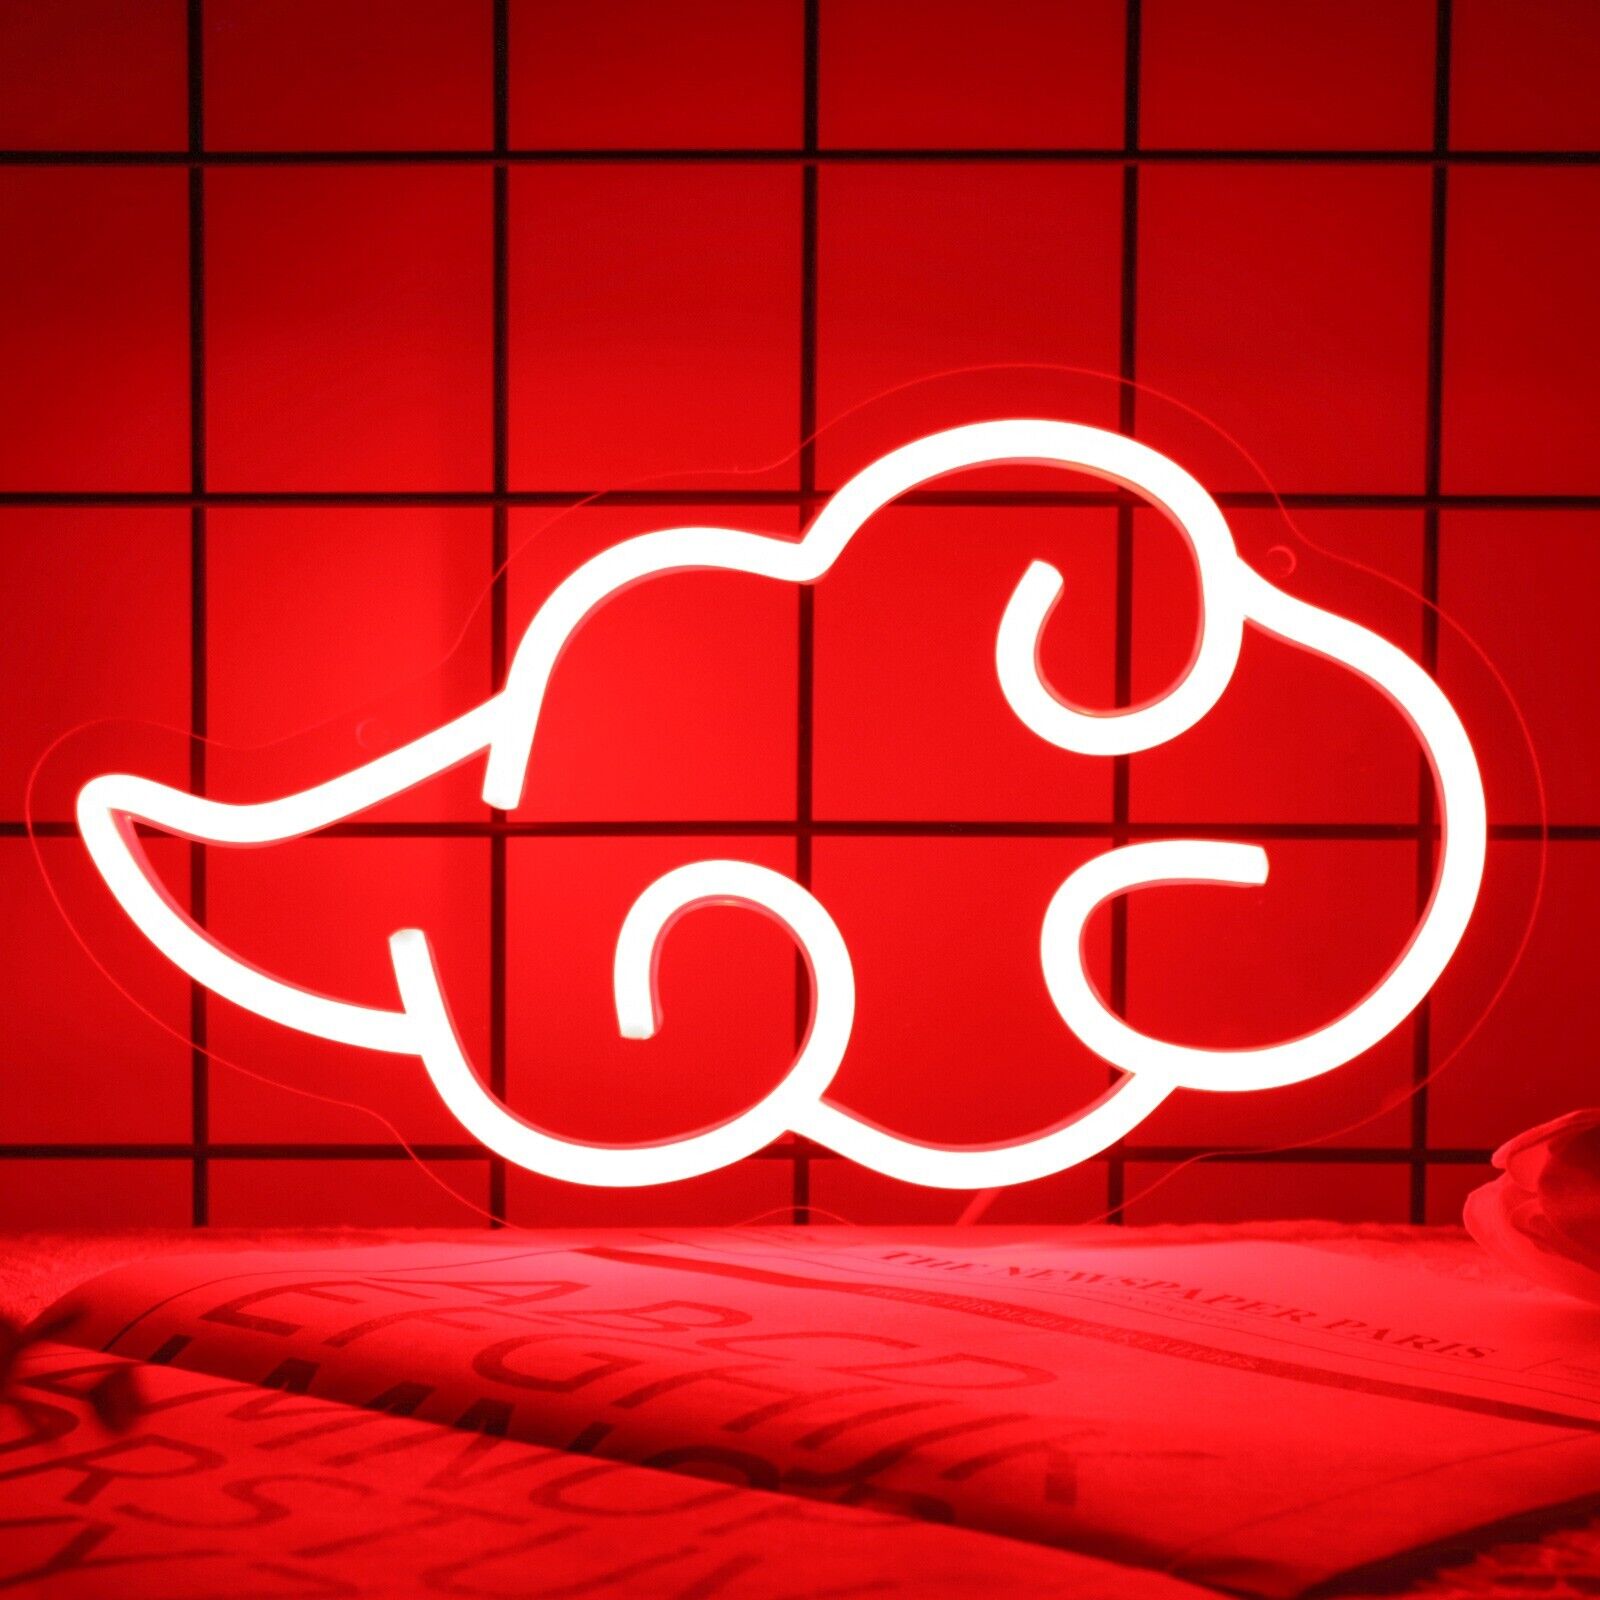 Anime Cloud Neon Signs, Red Cloud Neon Sign, LED Anime Cloud Neon Light for Wall